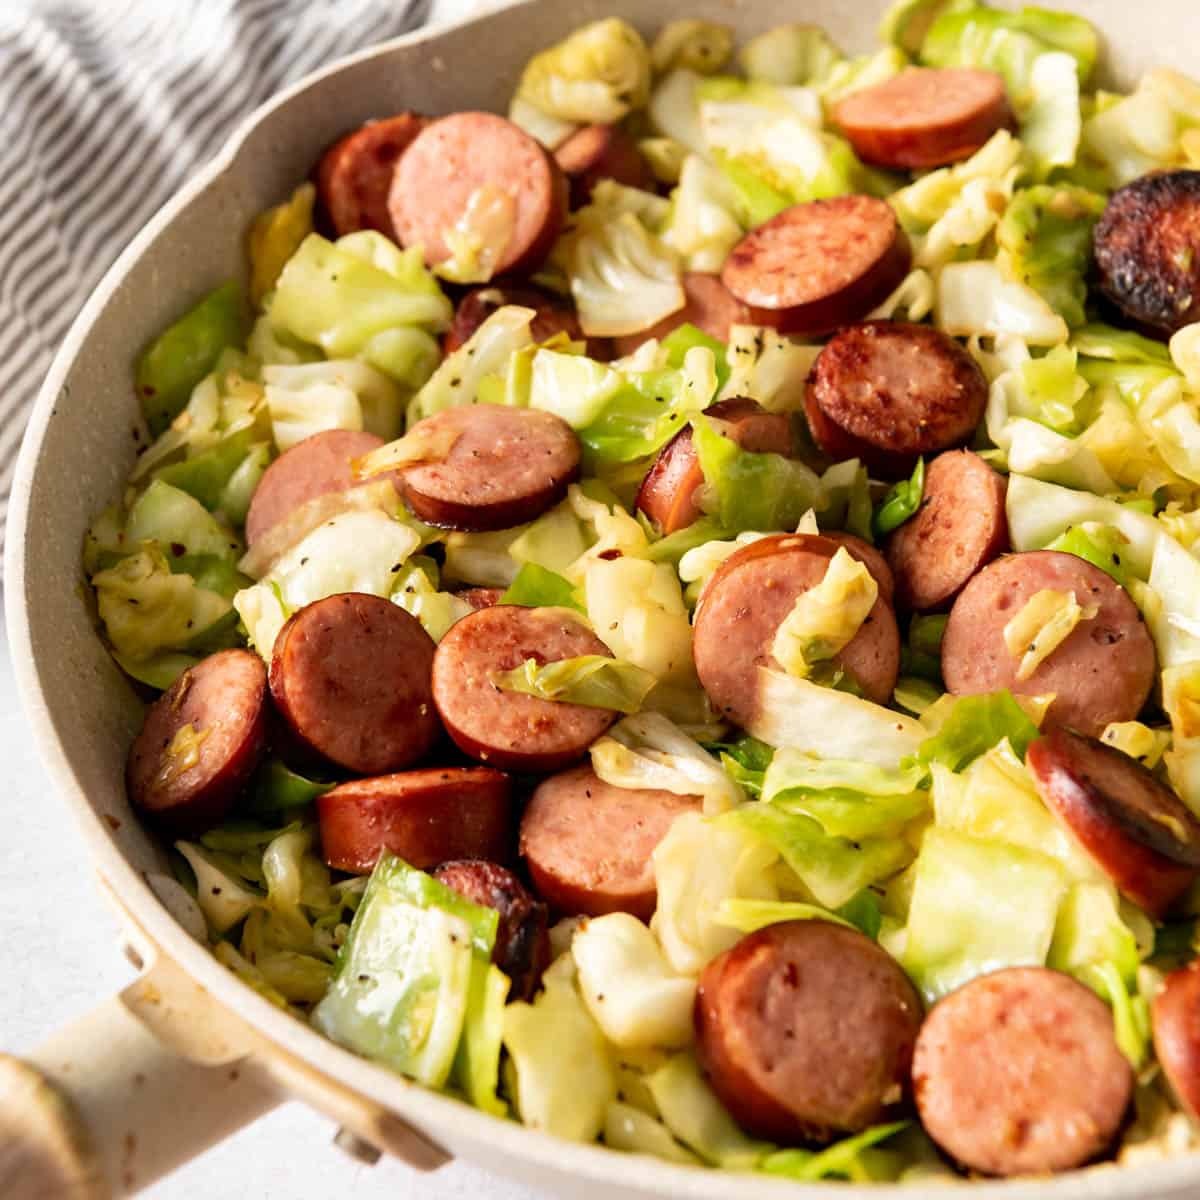 Easy Cabbage and Sausage Skillet Meal - easydinnerrecipes.com